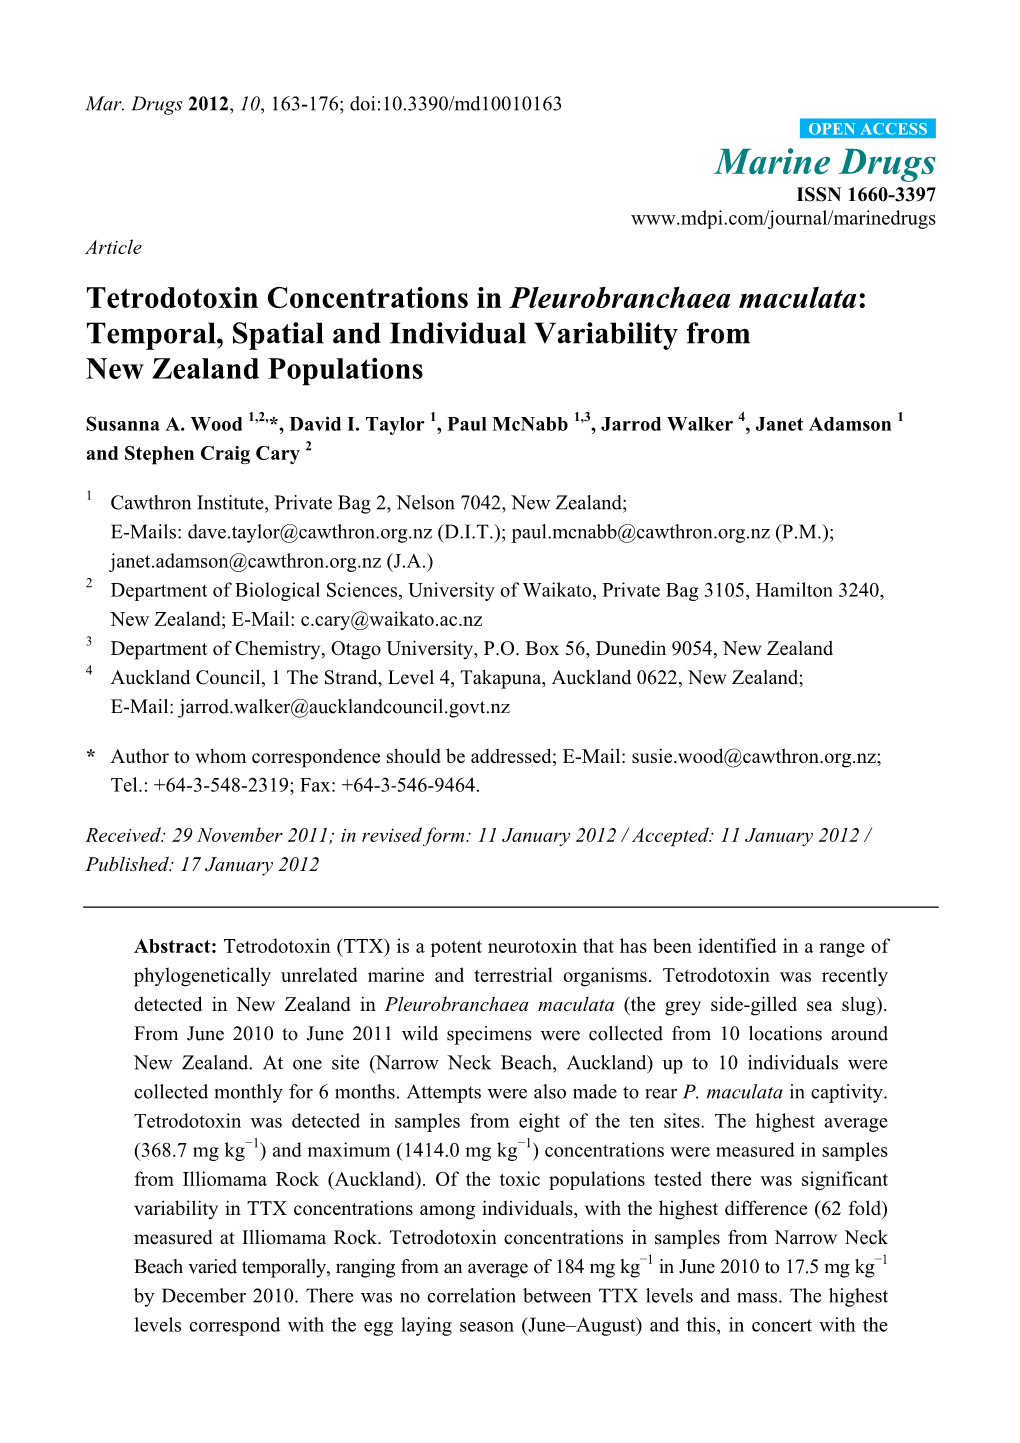 Tetrodotoxin Concentrations in Pleurobranchaea Maculata: Temporal, Spatial and Individual Variability from New Zealand Populations